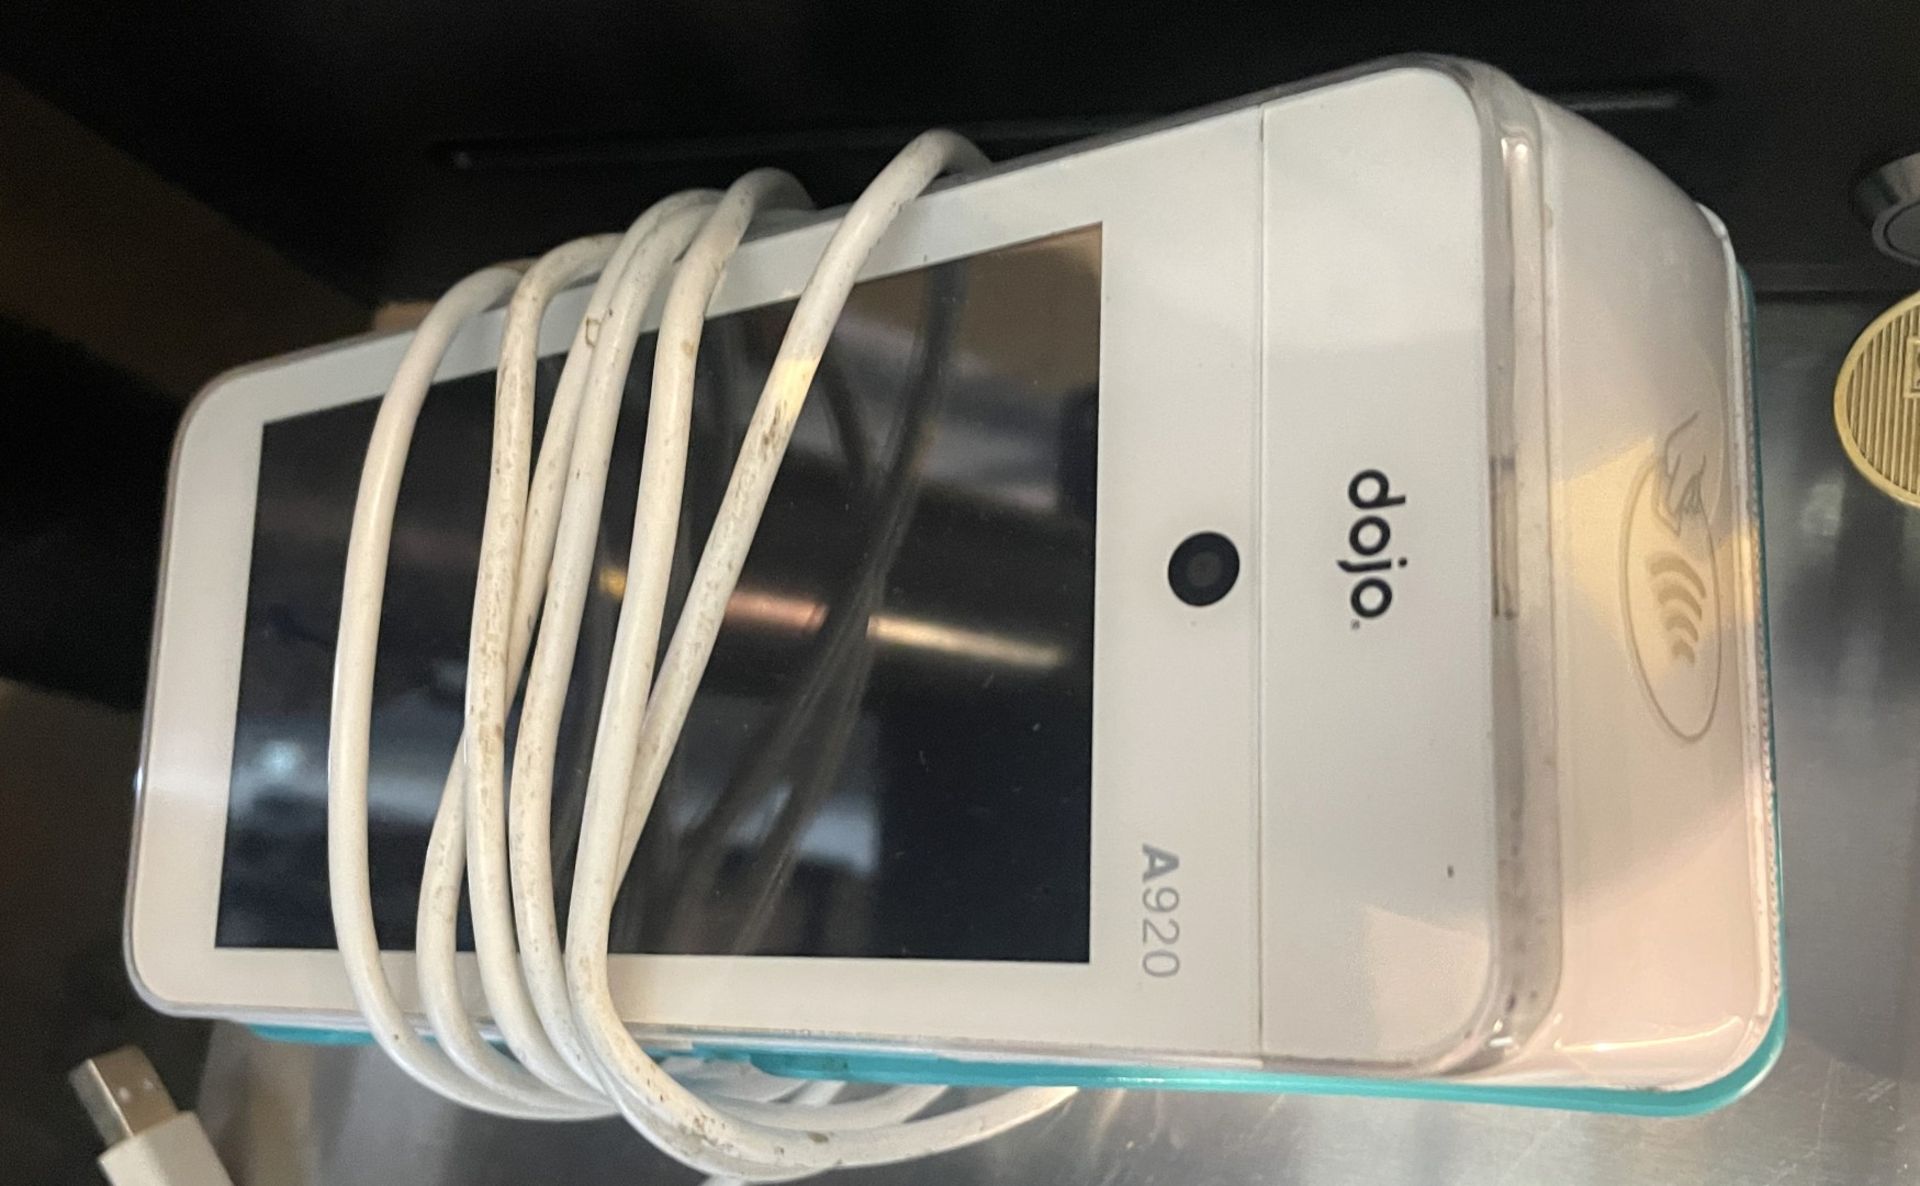 1 x DOJO GO A920 Wireless Card Payment Terminal With Docking Station - Image 2 of 5